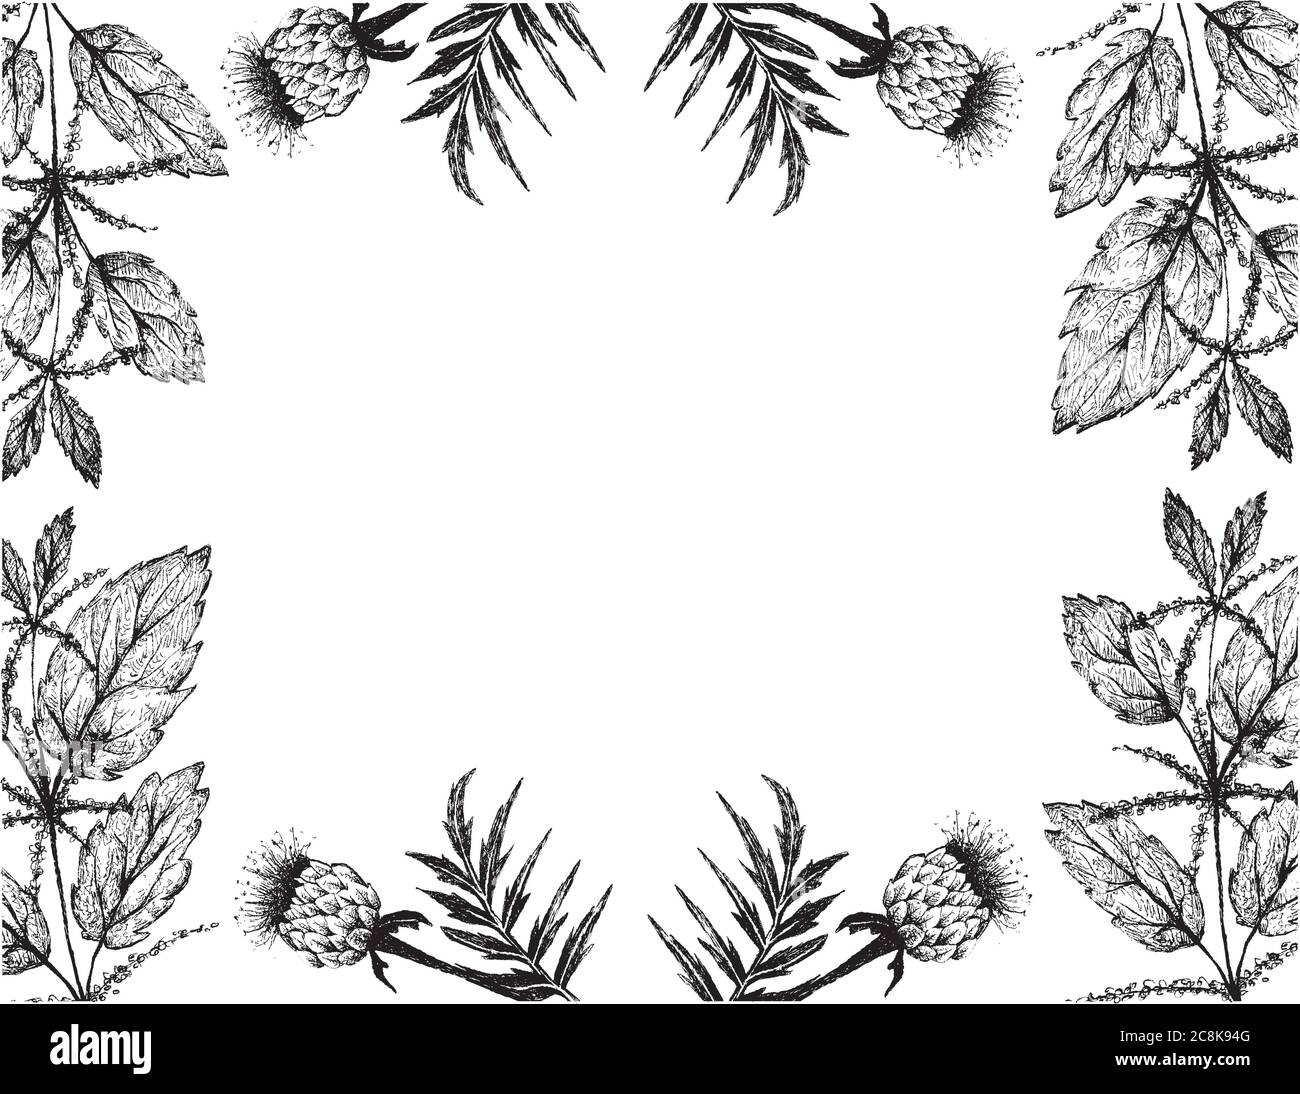 Herbal Flower and Plant, Hand Drawn Illustration Frame of Urtica Dioica or Stinging Nettle and Rhaponticum Carthamoides or Maral Root Plants, Used in Stock Vector